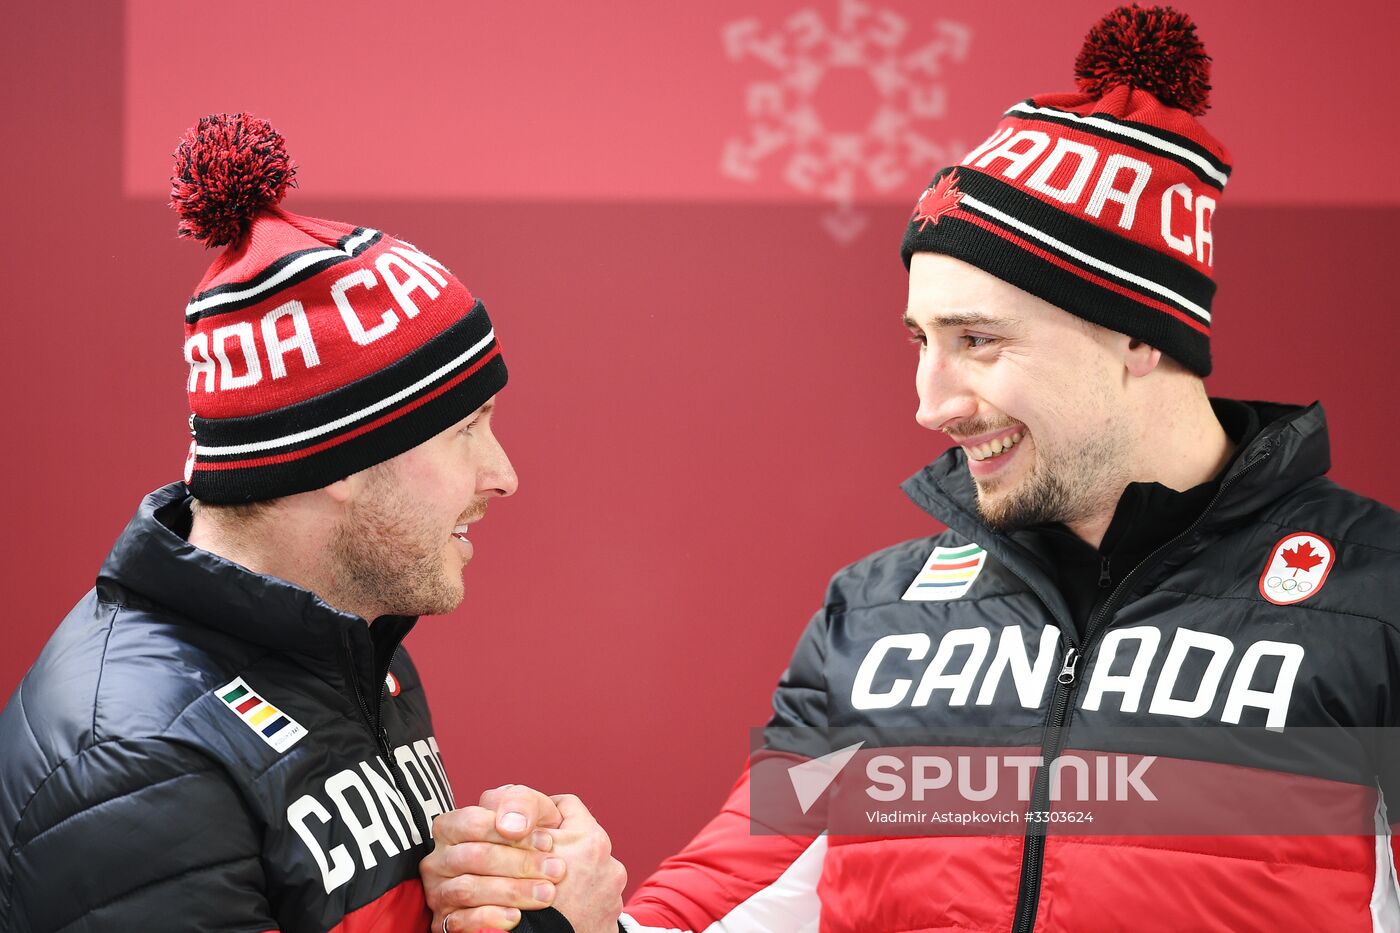 2018 Winter Olympics. Bobsleigh. Two-man